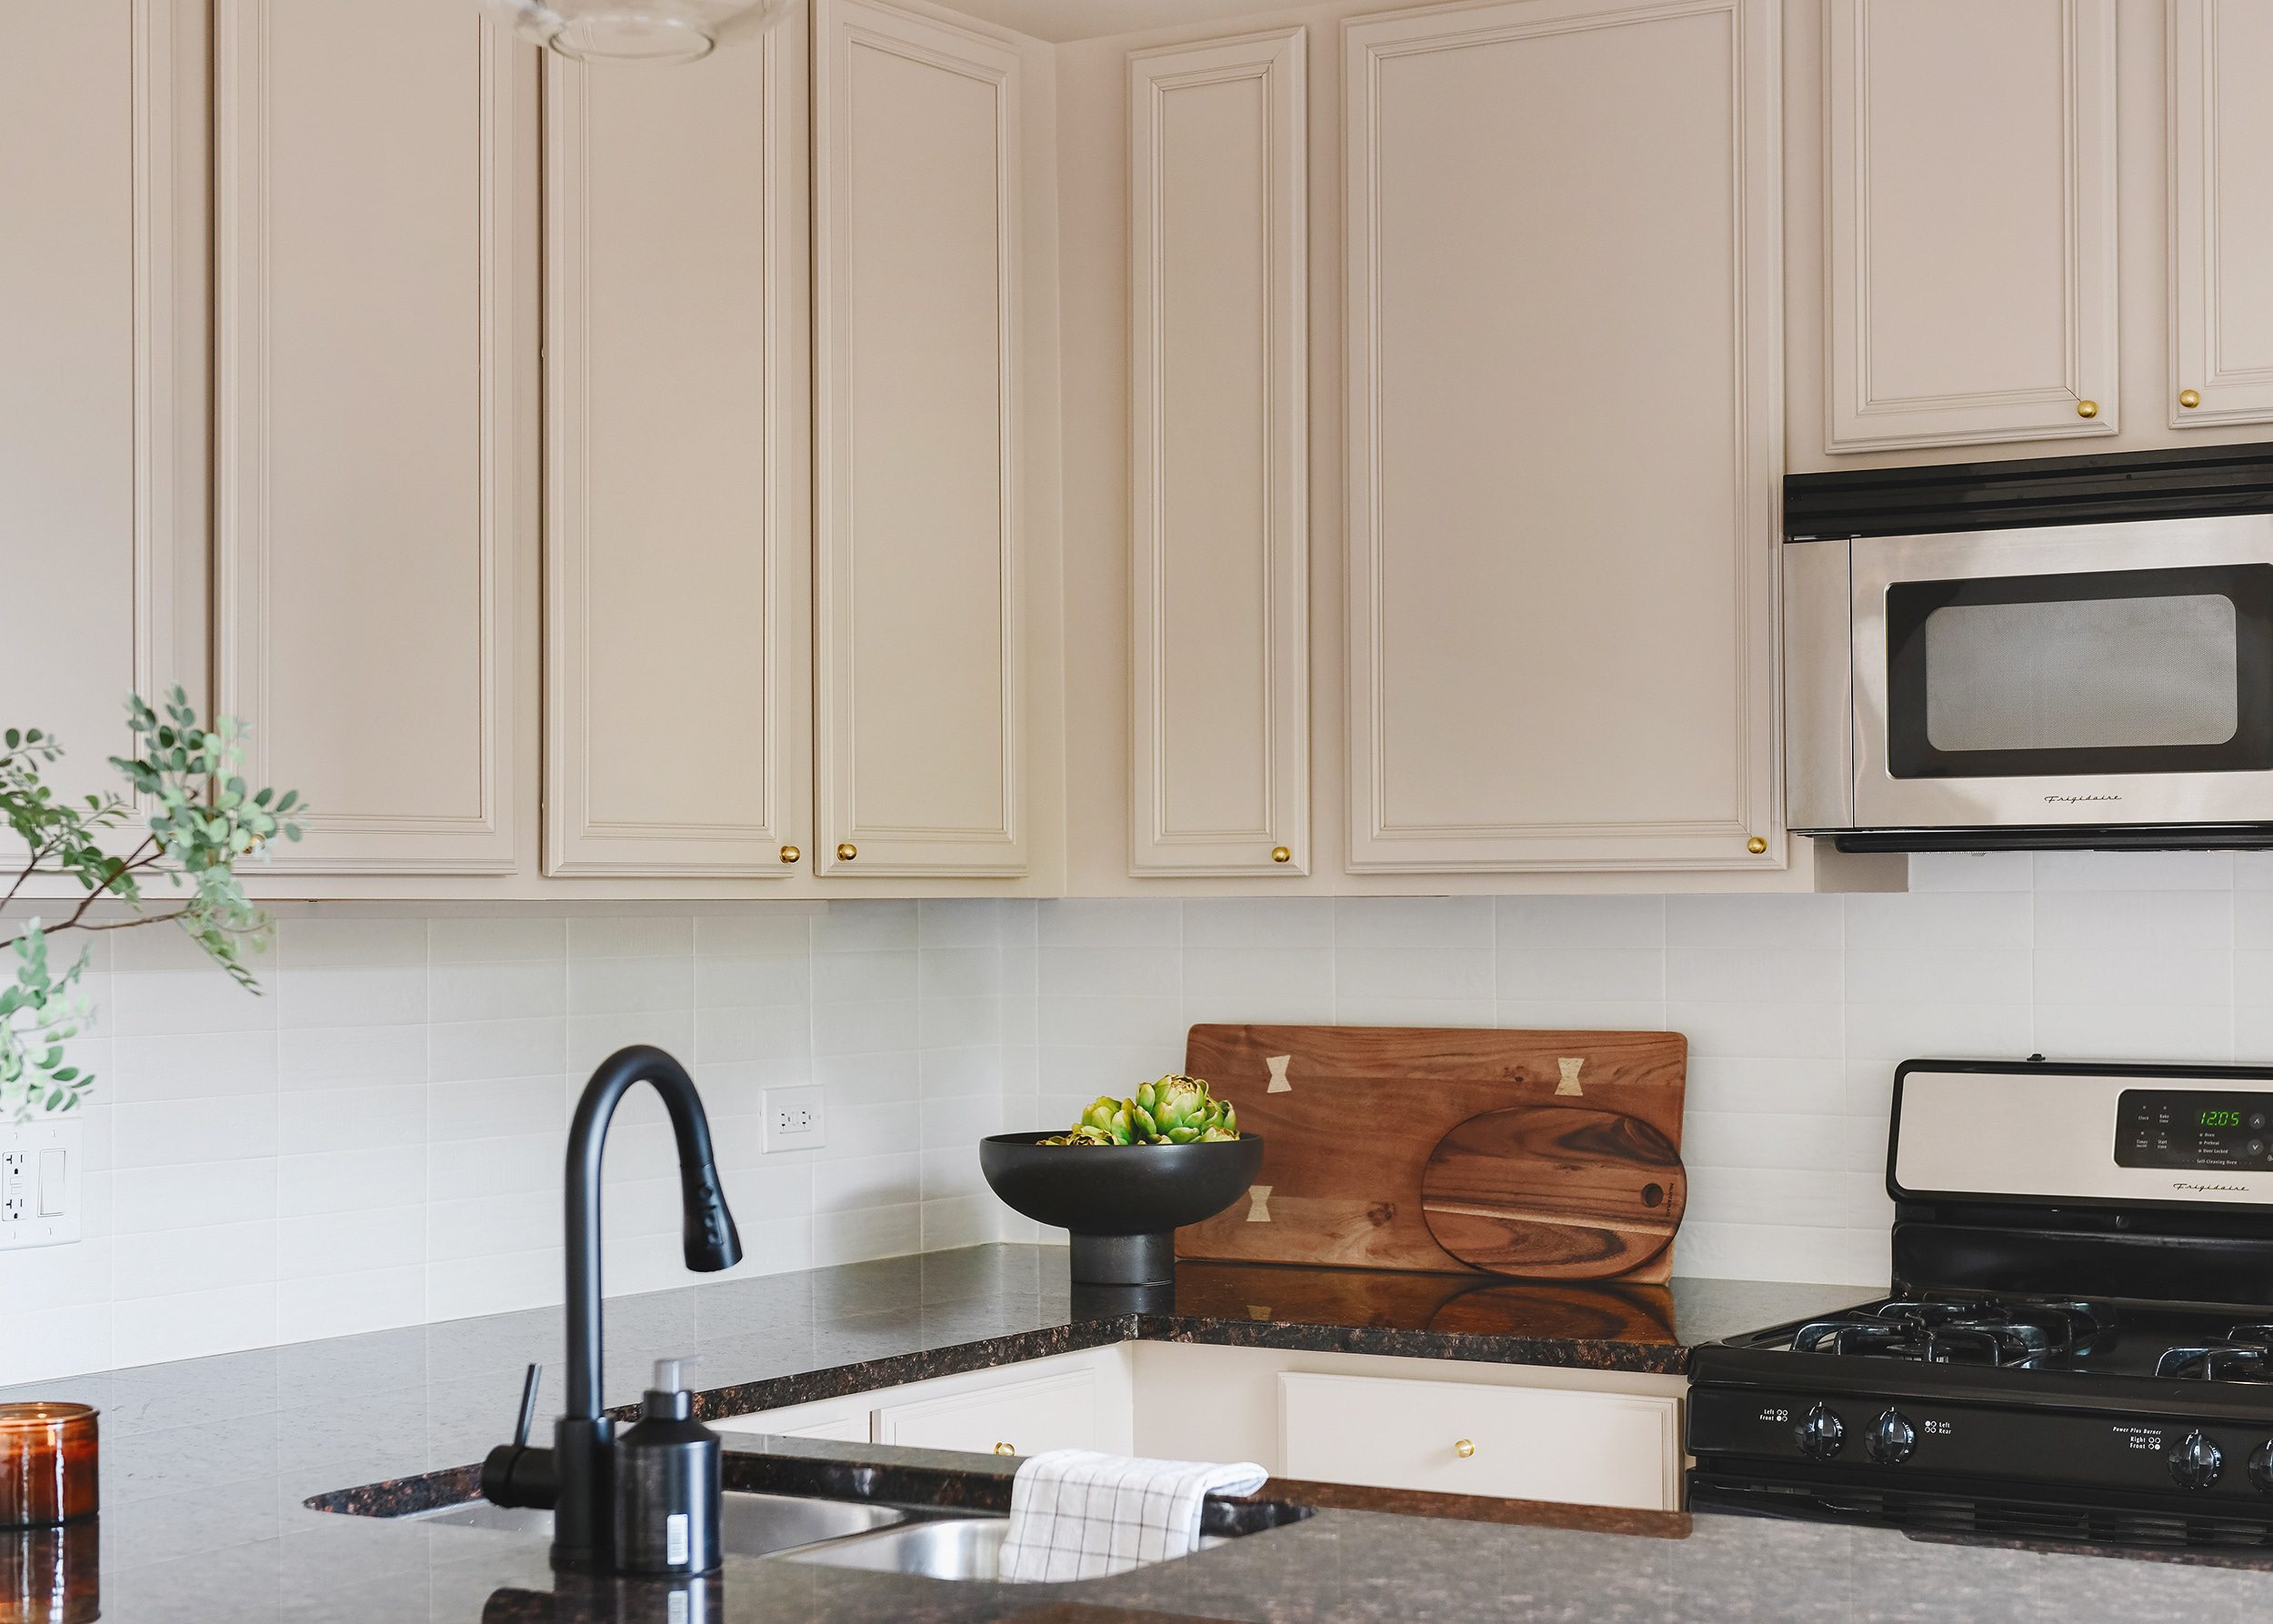 Valspar Lamb's Ear is the perfect neutral tone to compliment the existing granite countertops.